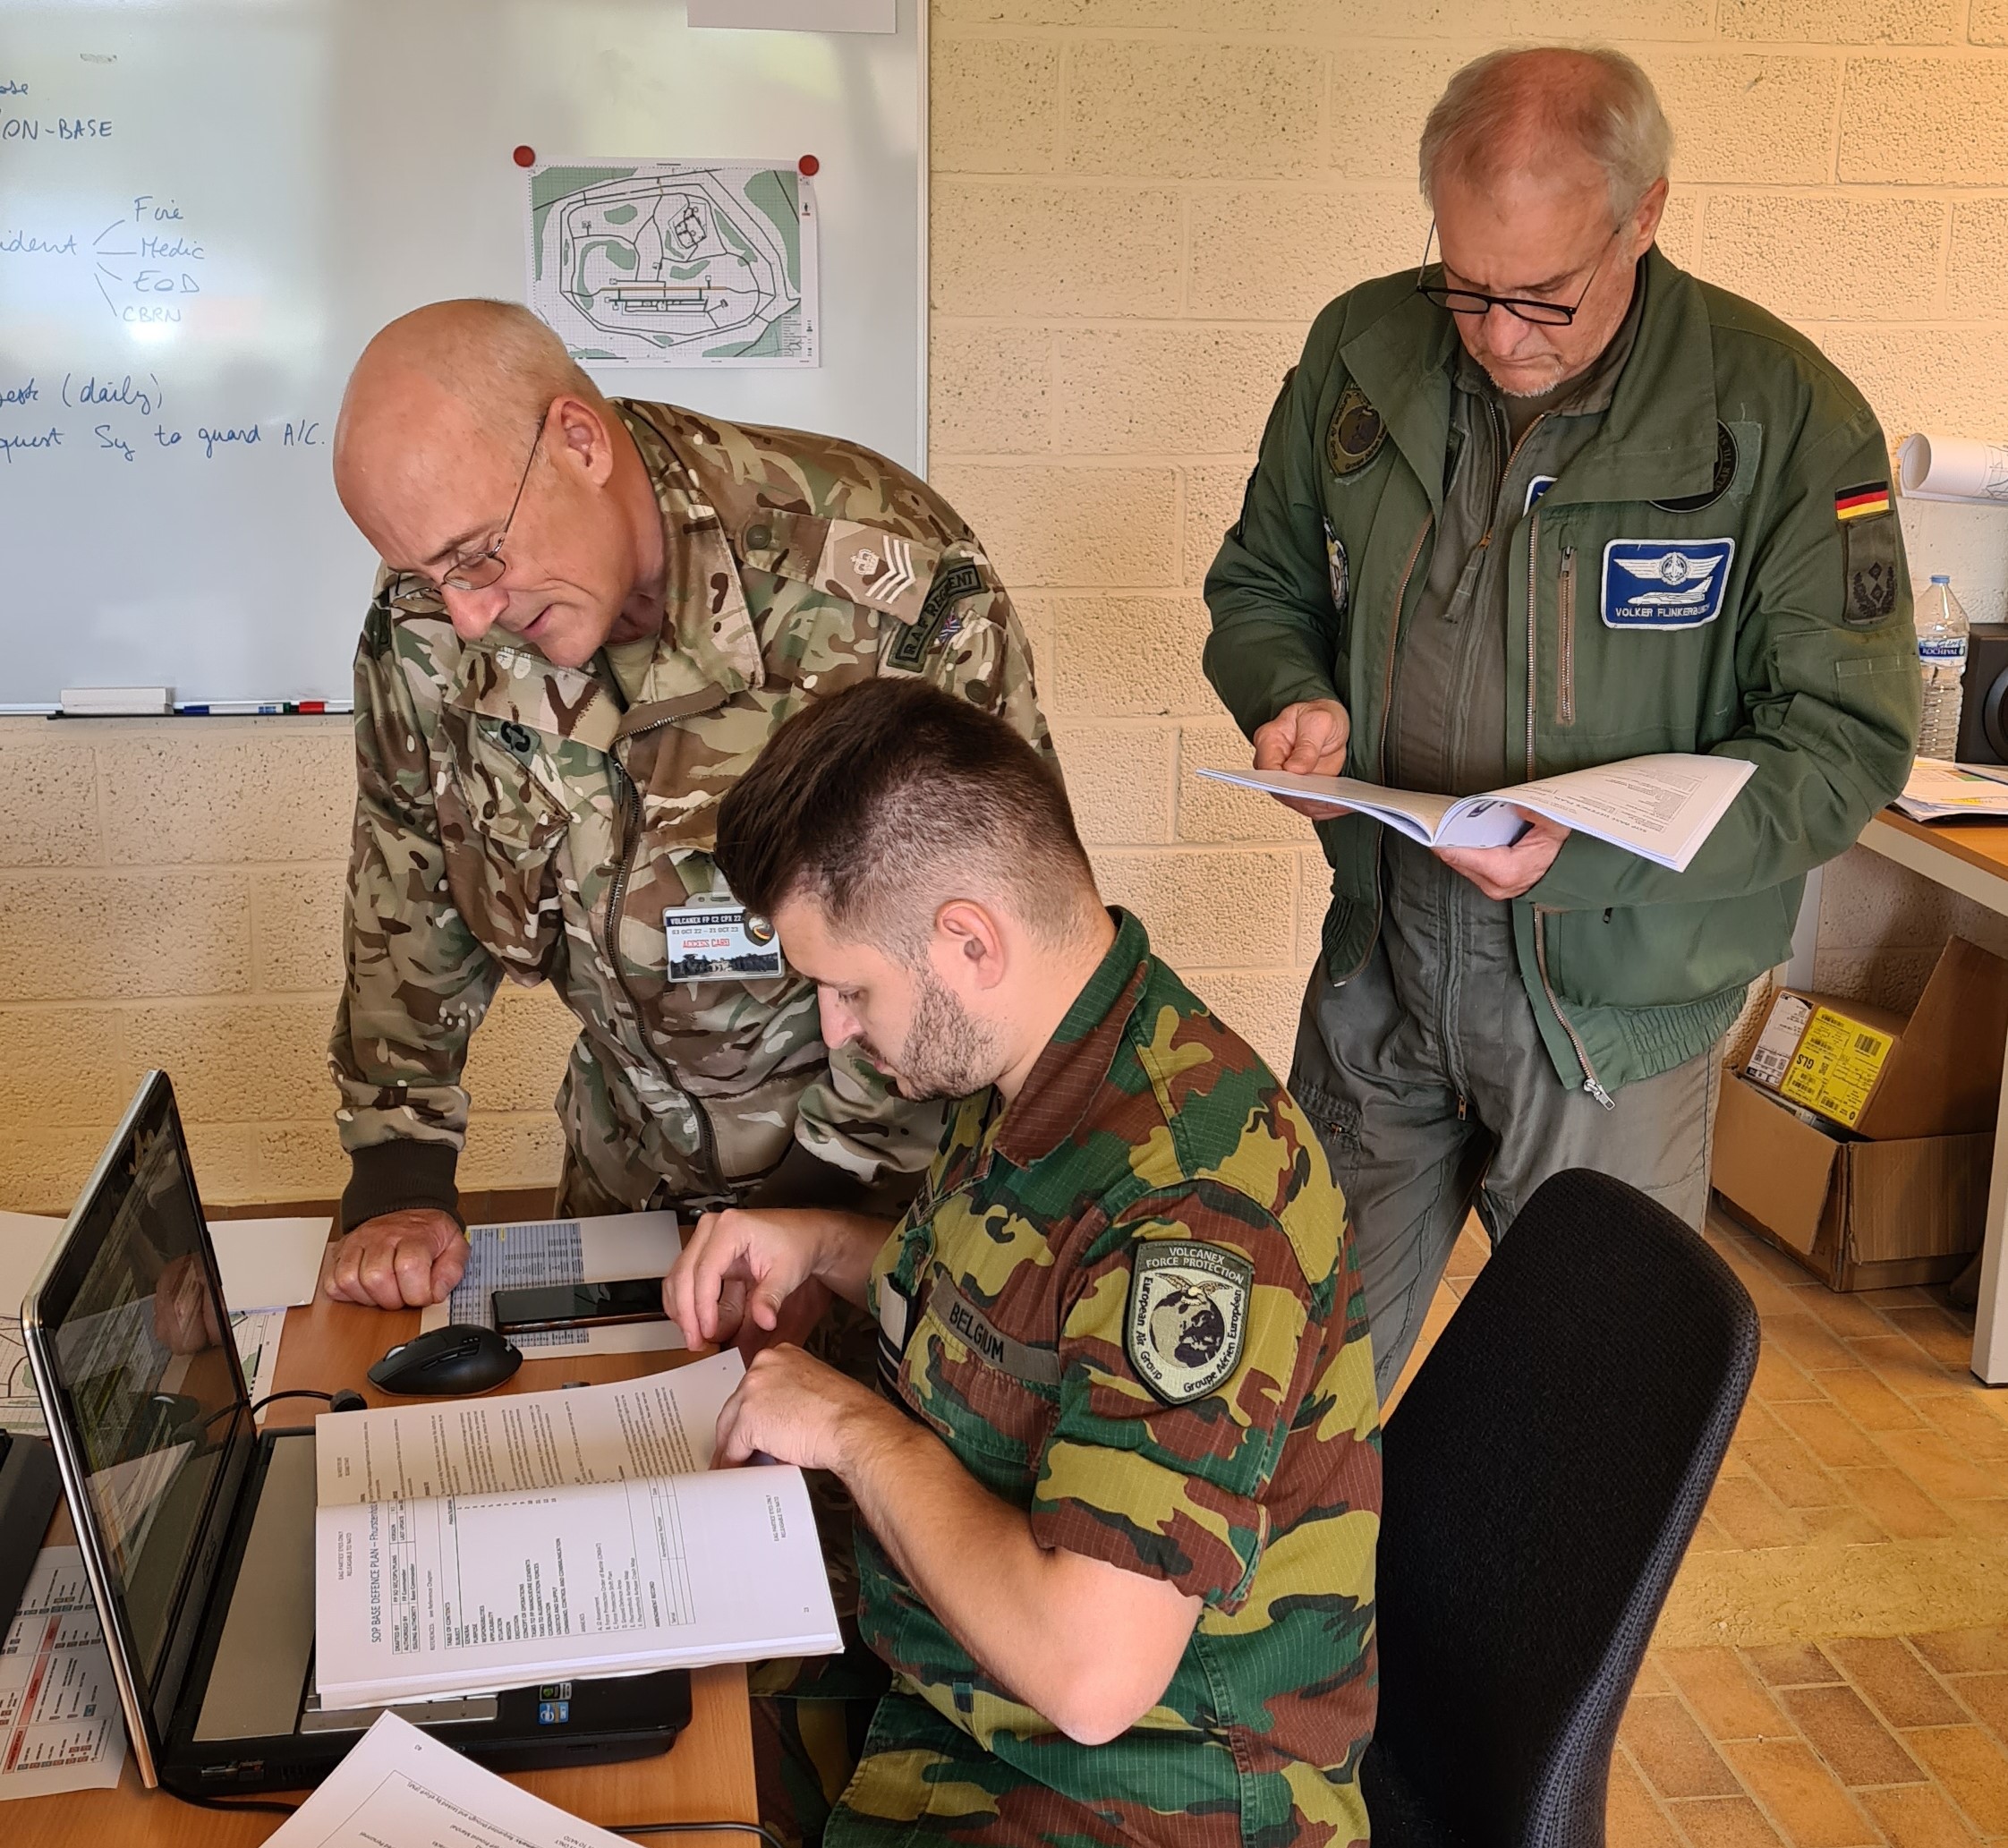 Image shows RAF personnel working at a table with computer. 